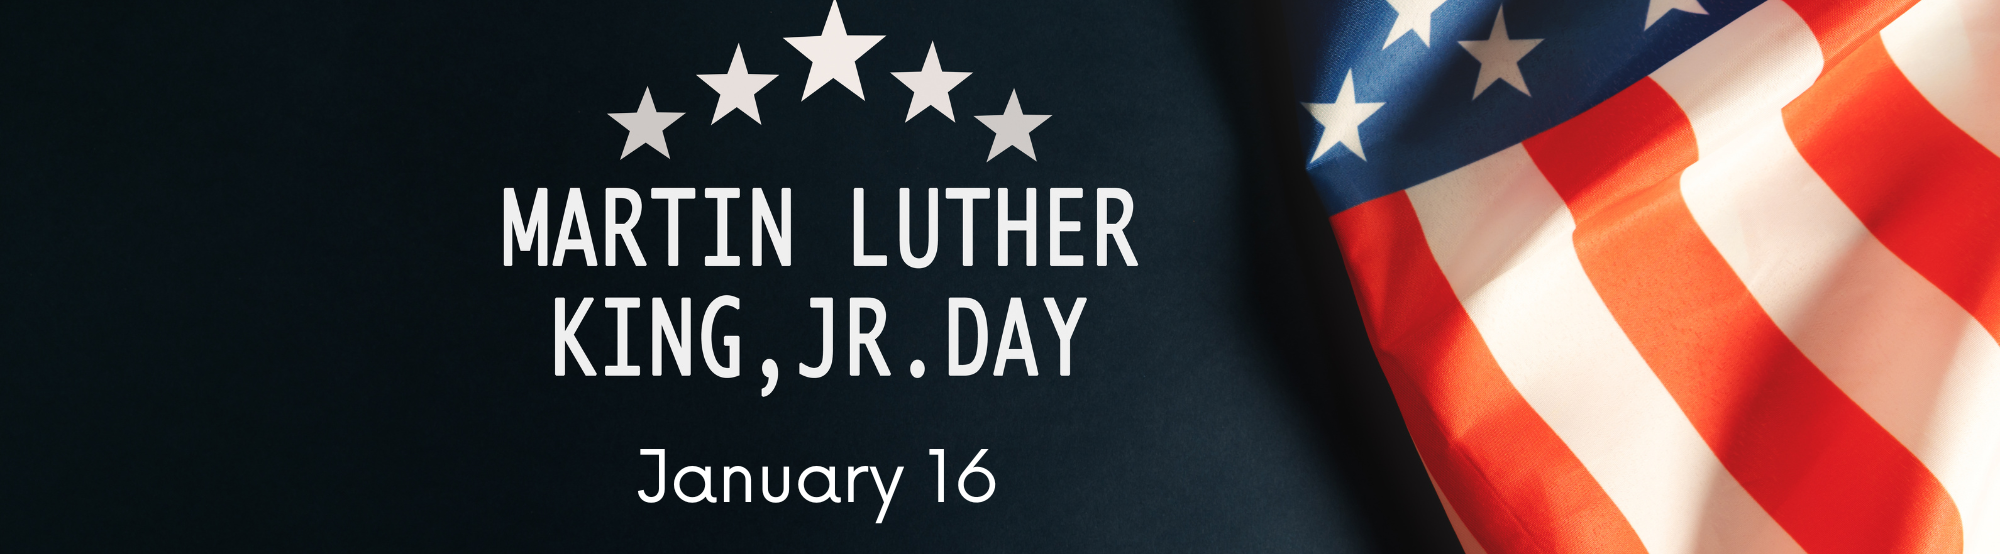 Decorative banner with the text Martin Luther King Jr Day: January 16th